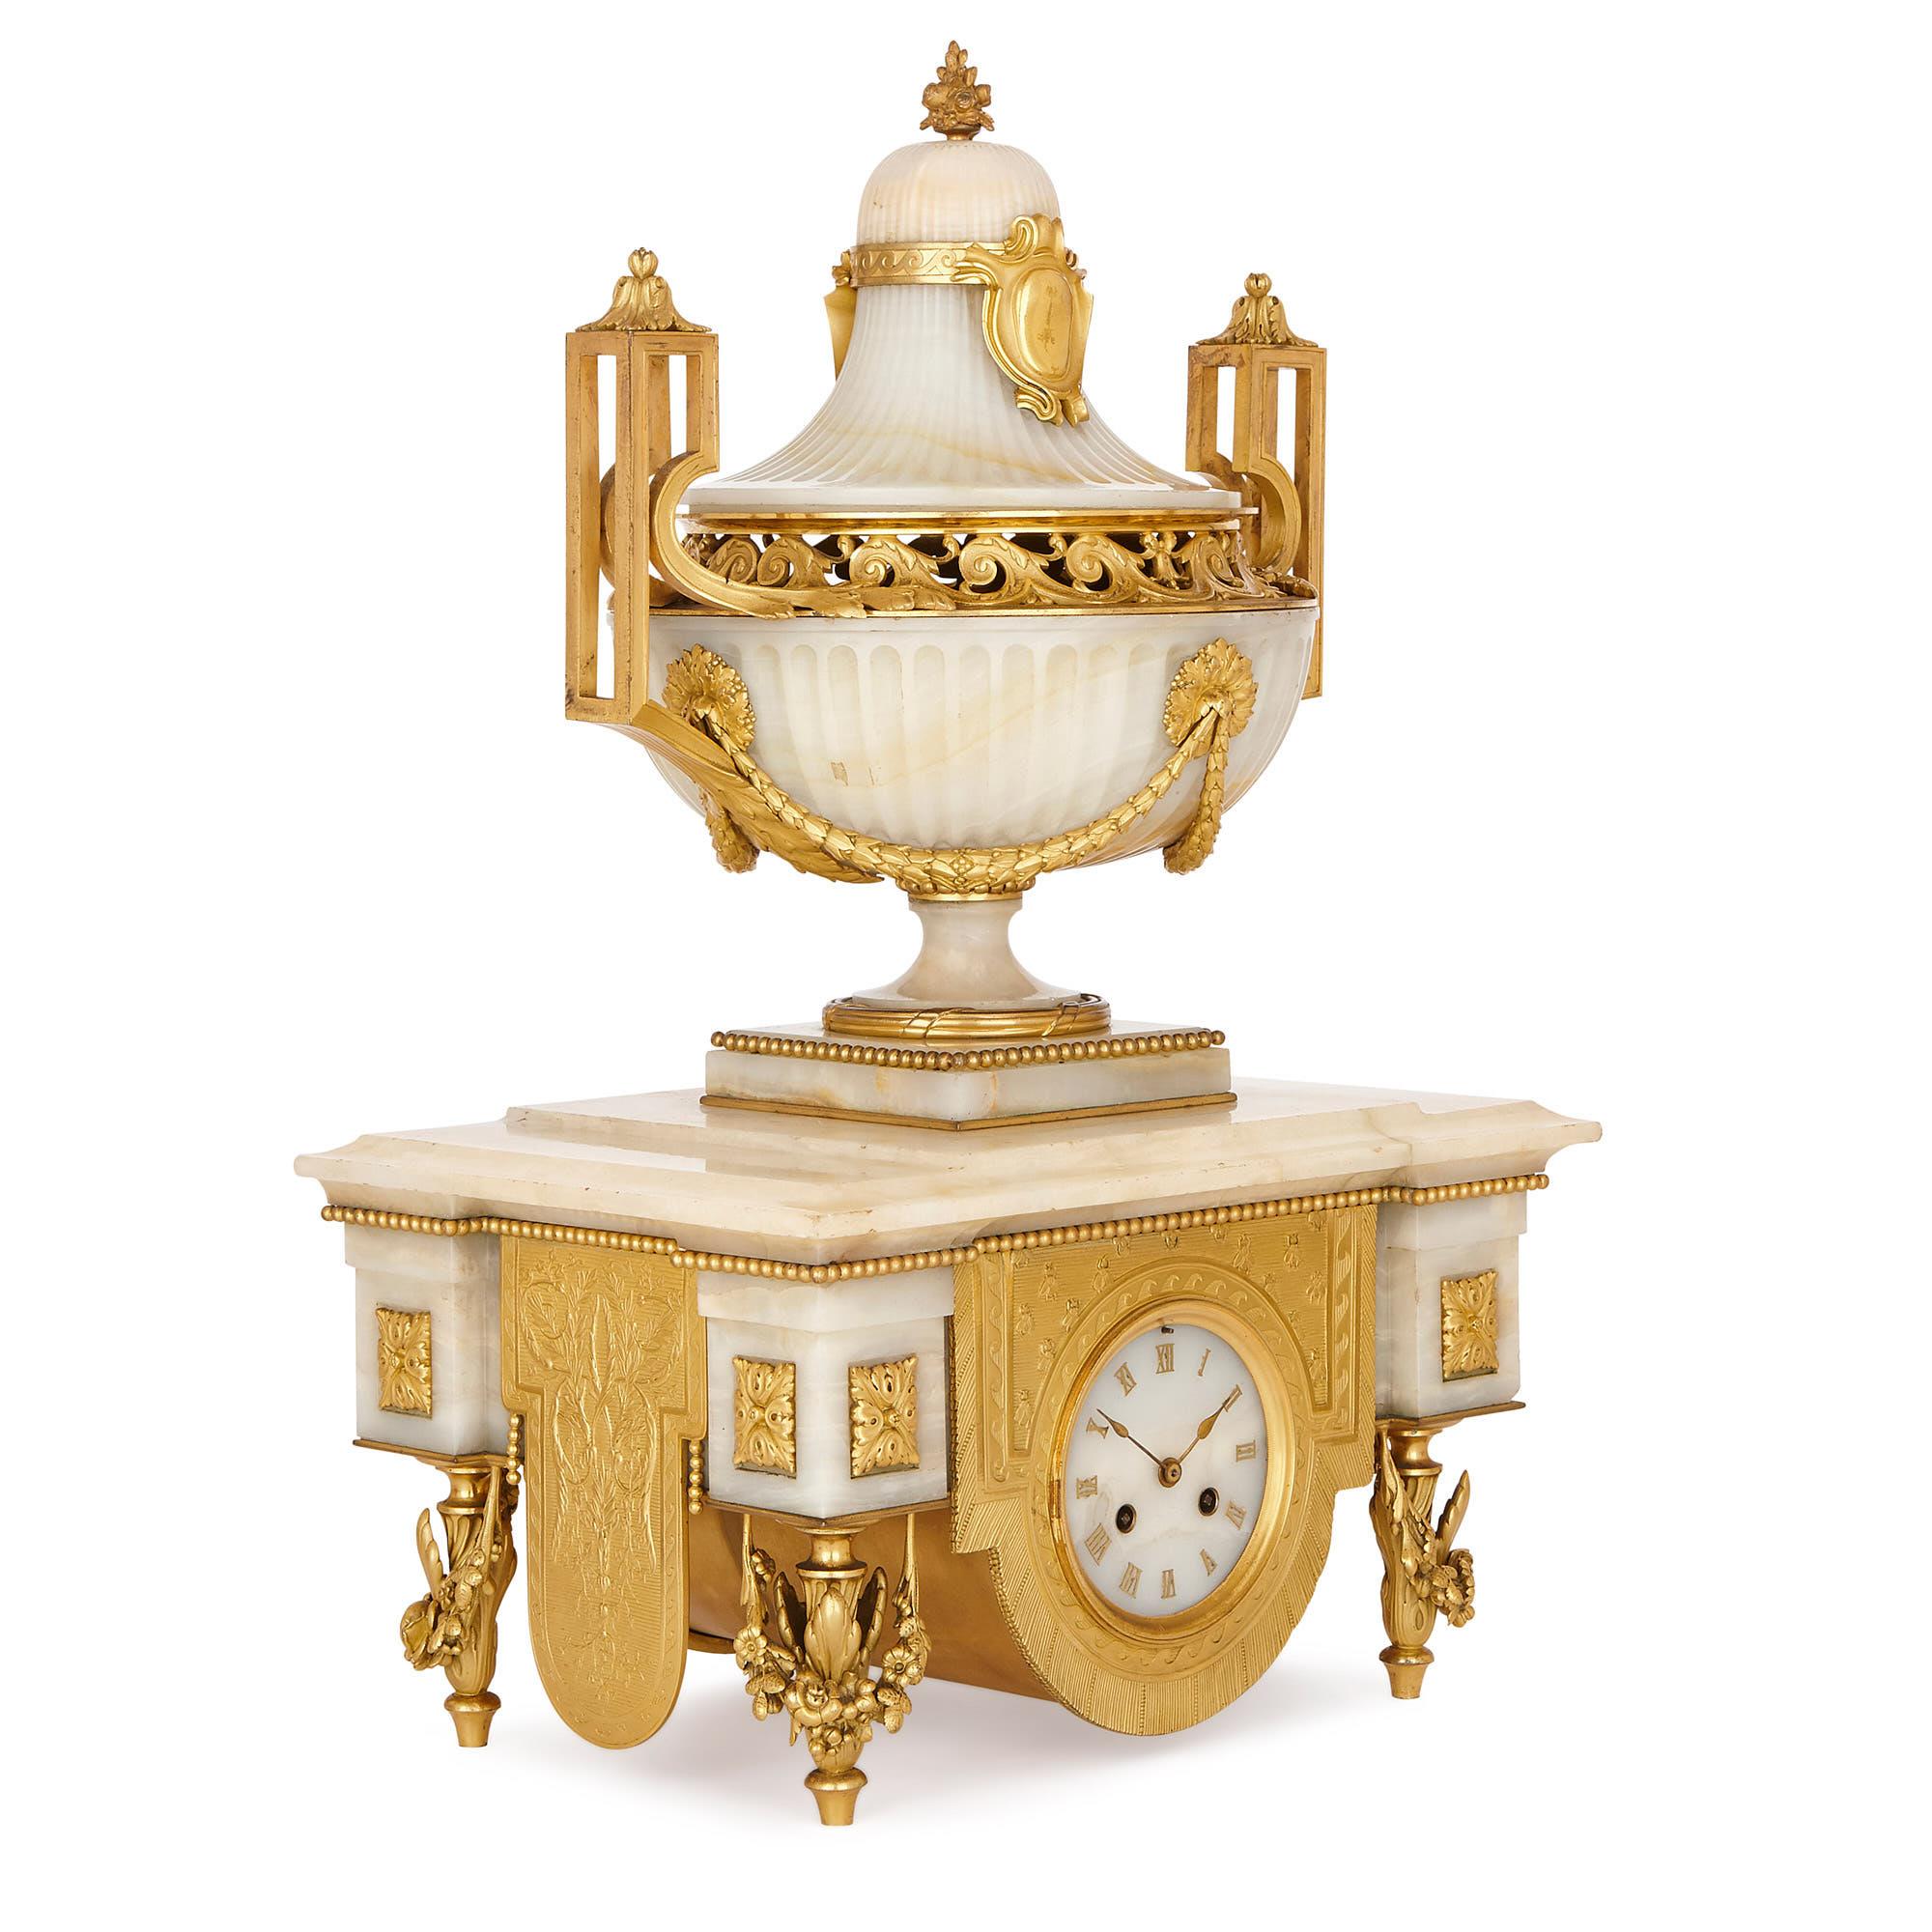 The white onyx and gilt bronze three-piece set consists of a central clock, accompanied by two six-light candelabra. The three items were crafted in the 19th century, during the reign of Napoleon III (1852-1870), and have been attributed to